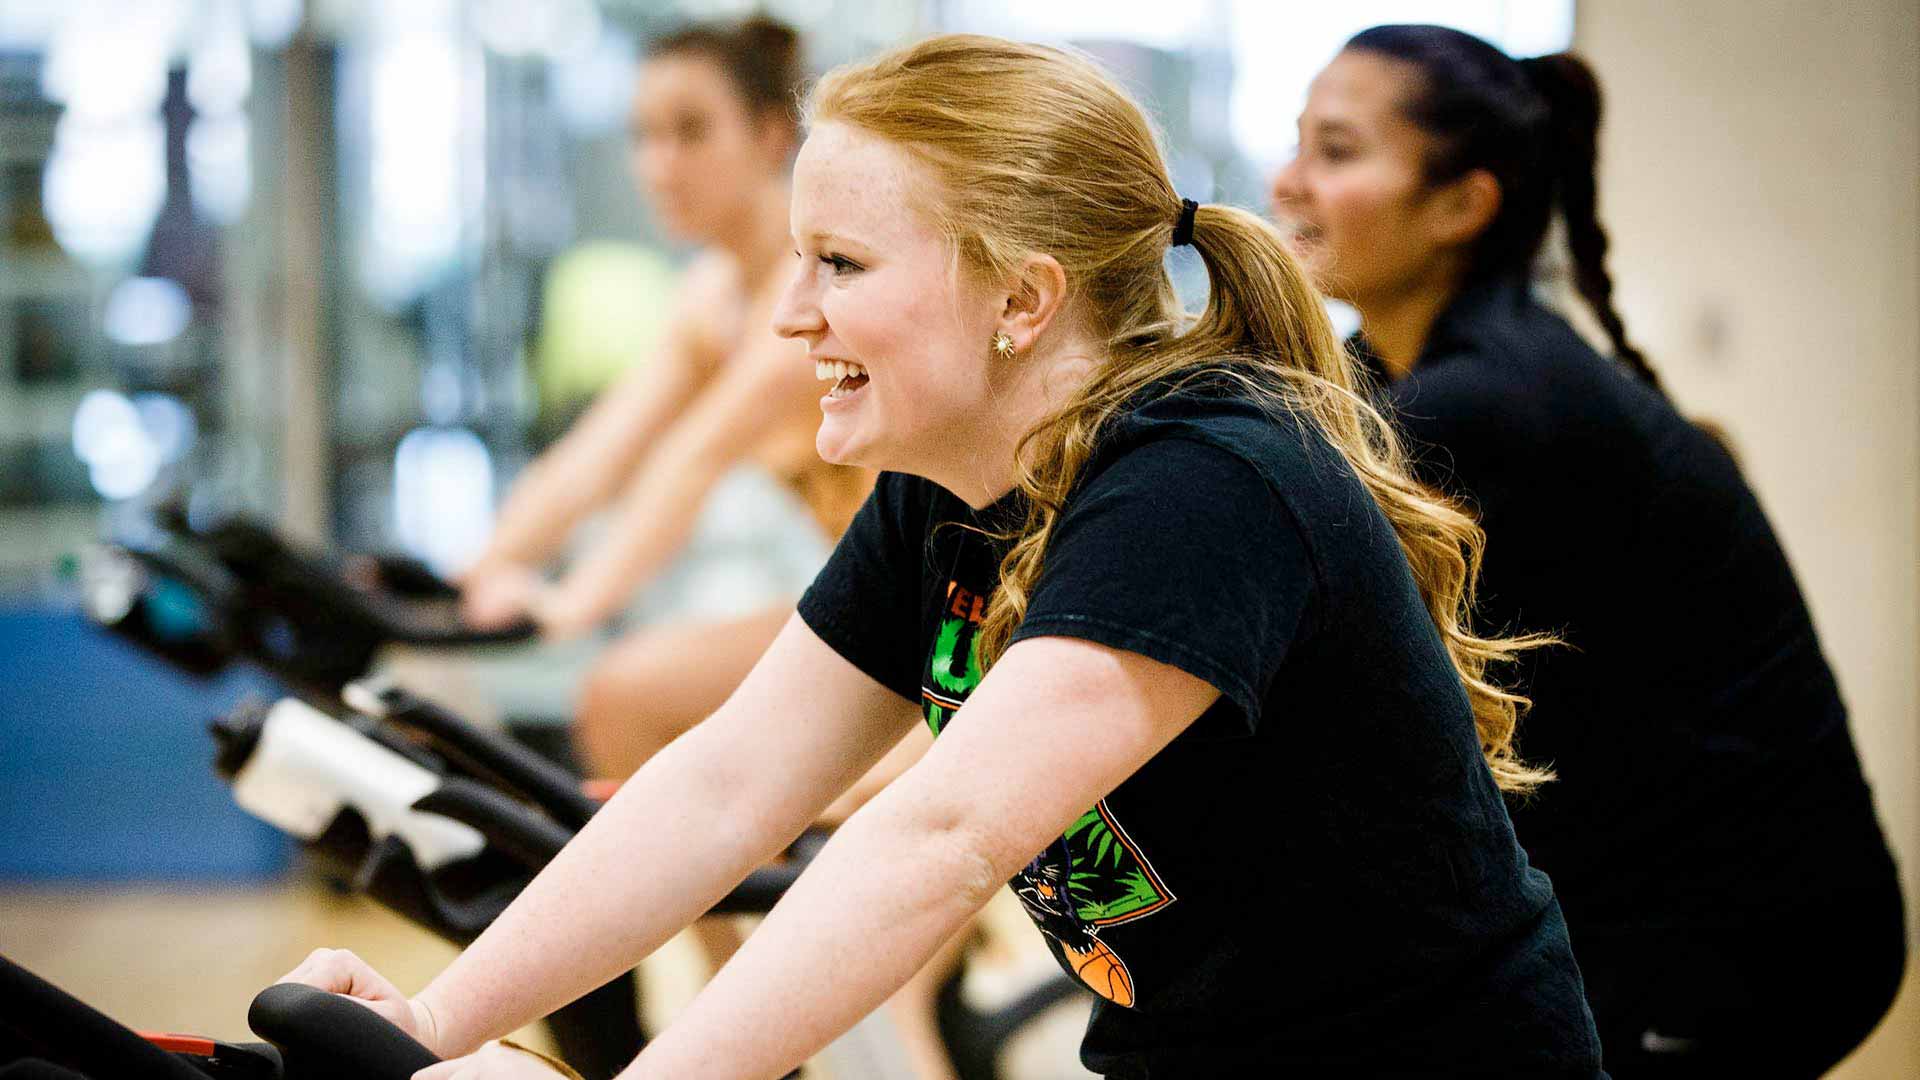 https://www.stthomas.edu/_media-library/_images/cas/health-and-exercise-science/1920x1080/exercise-science-student-cycling-class.jpg